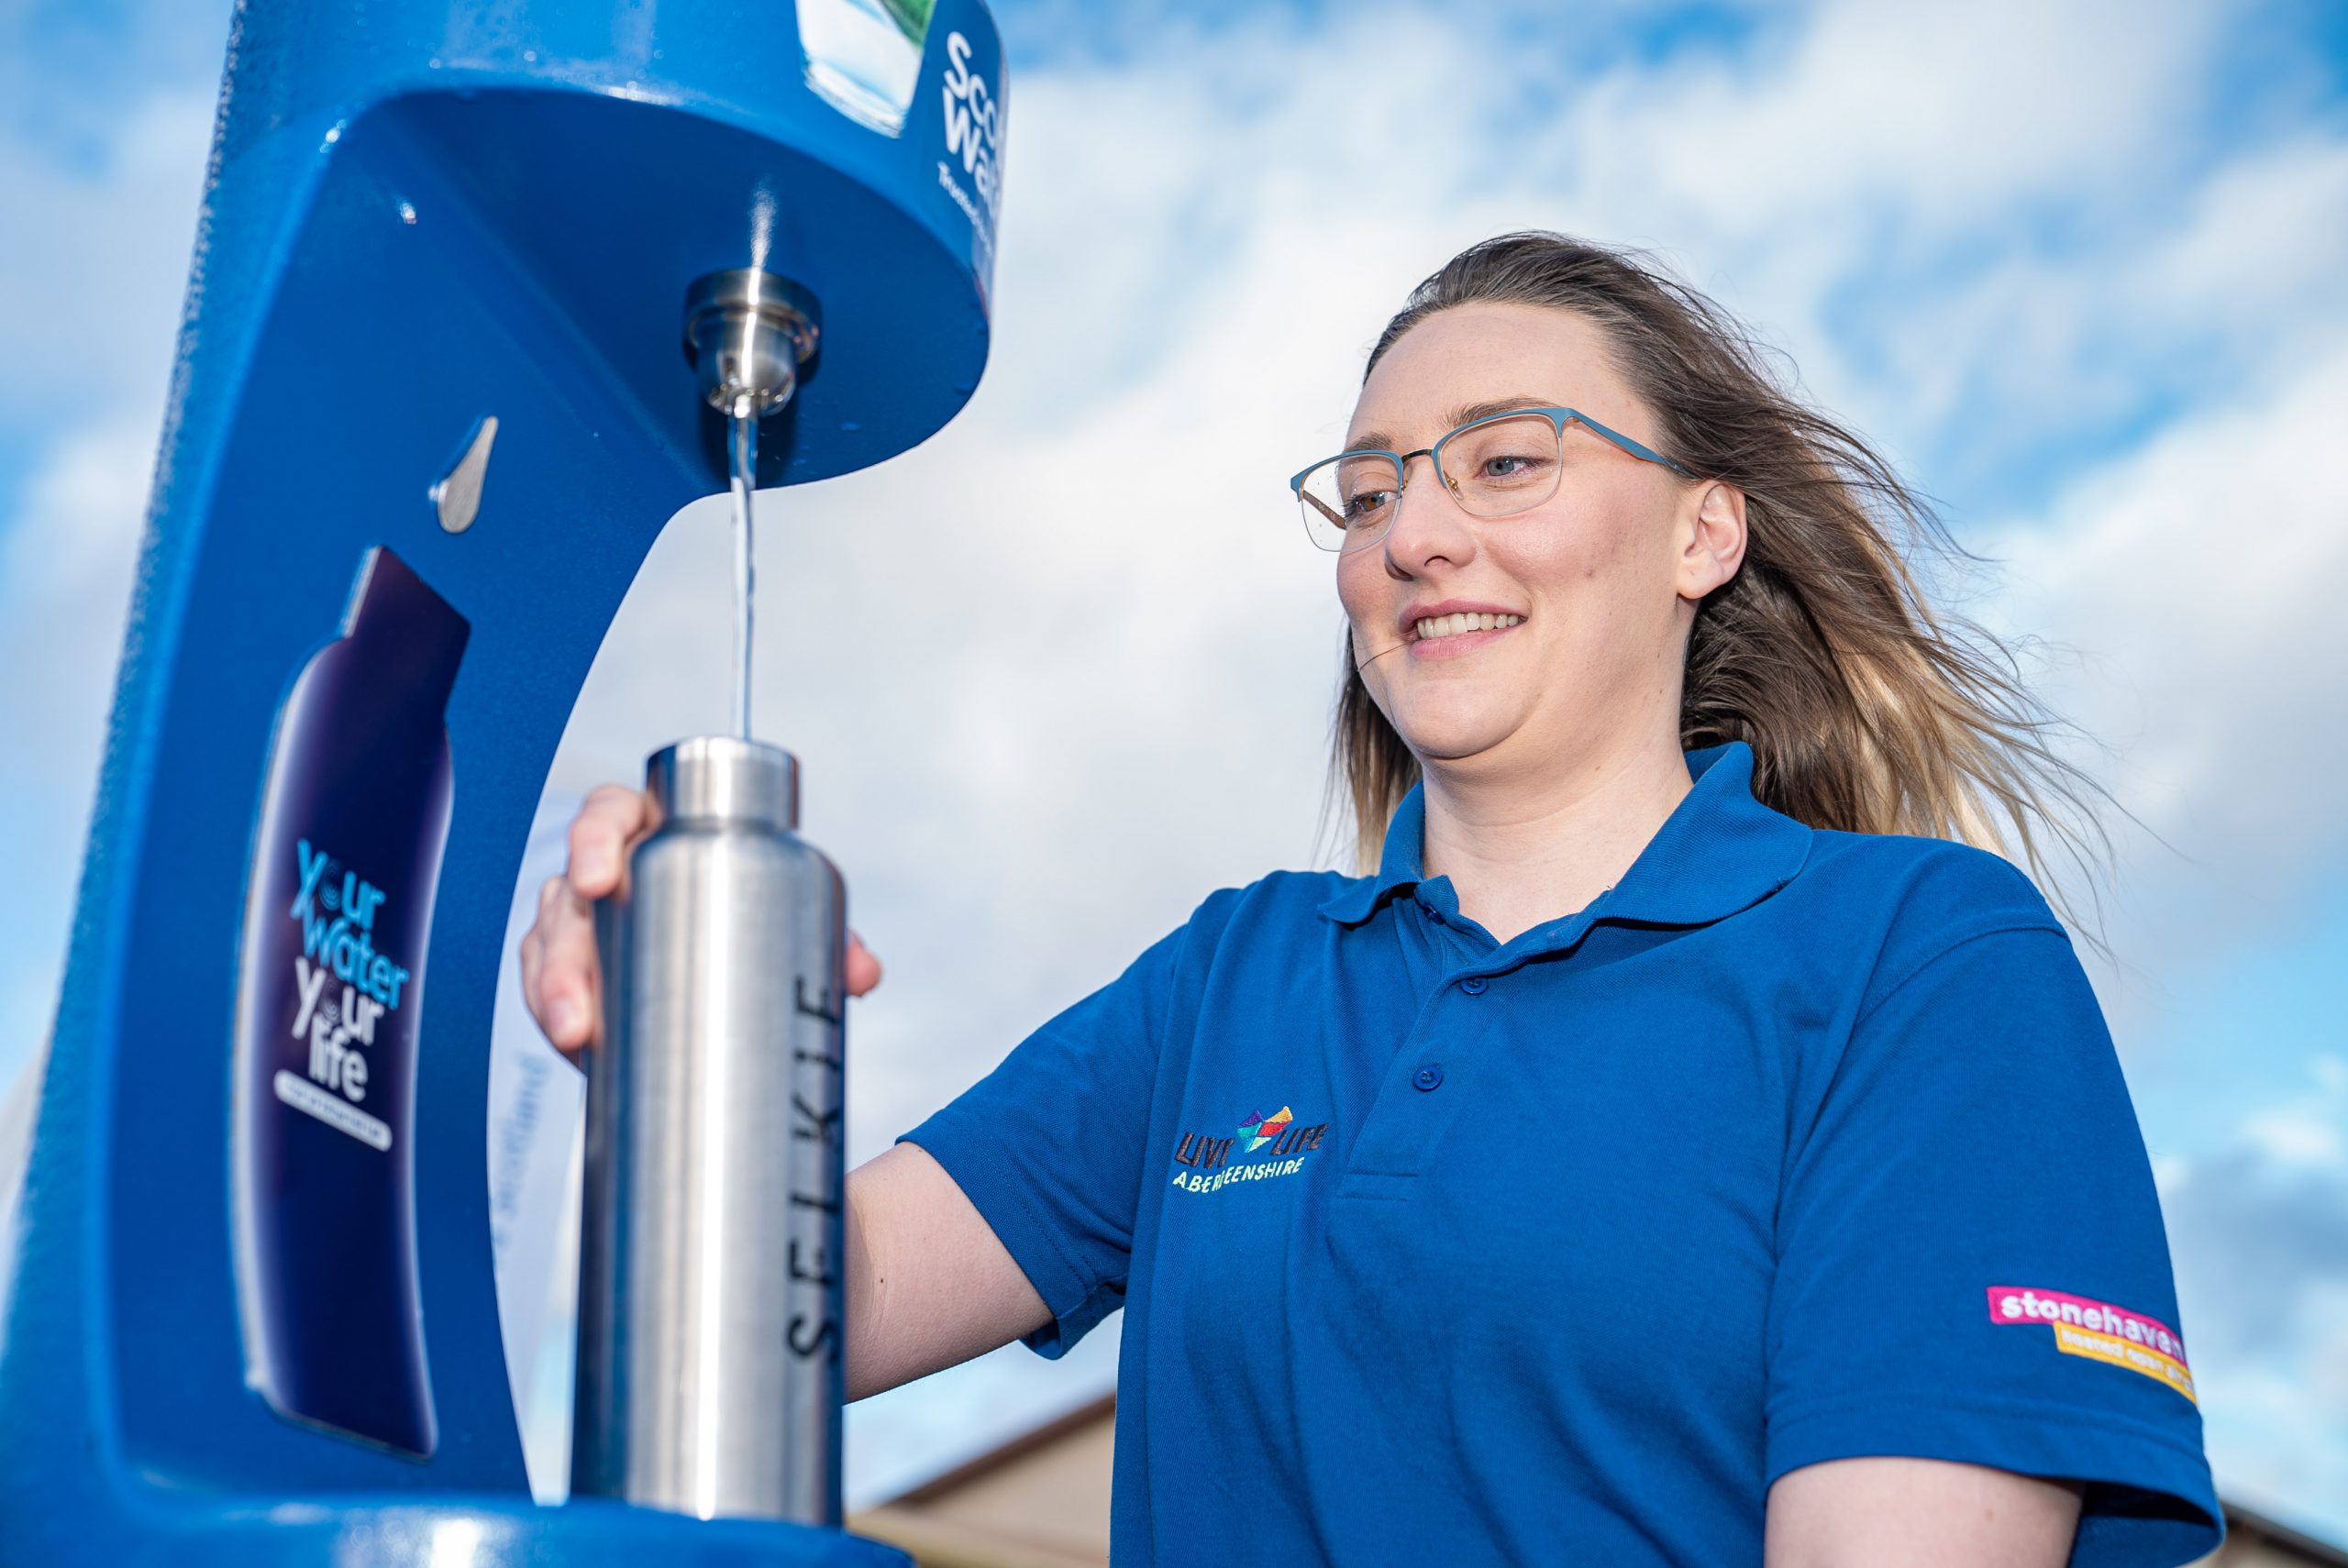 New Scottish Water Top Up Tap makes a splash in Stonehaven